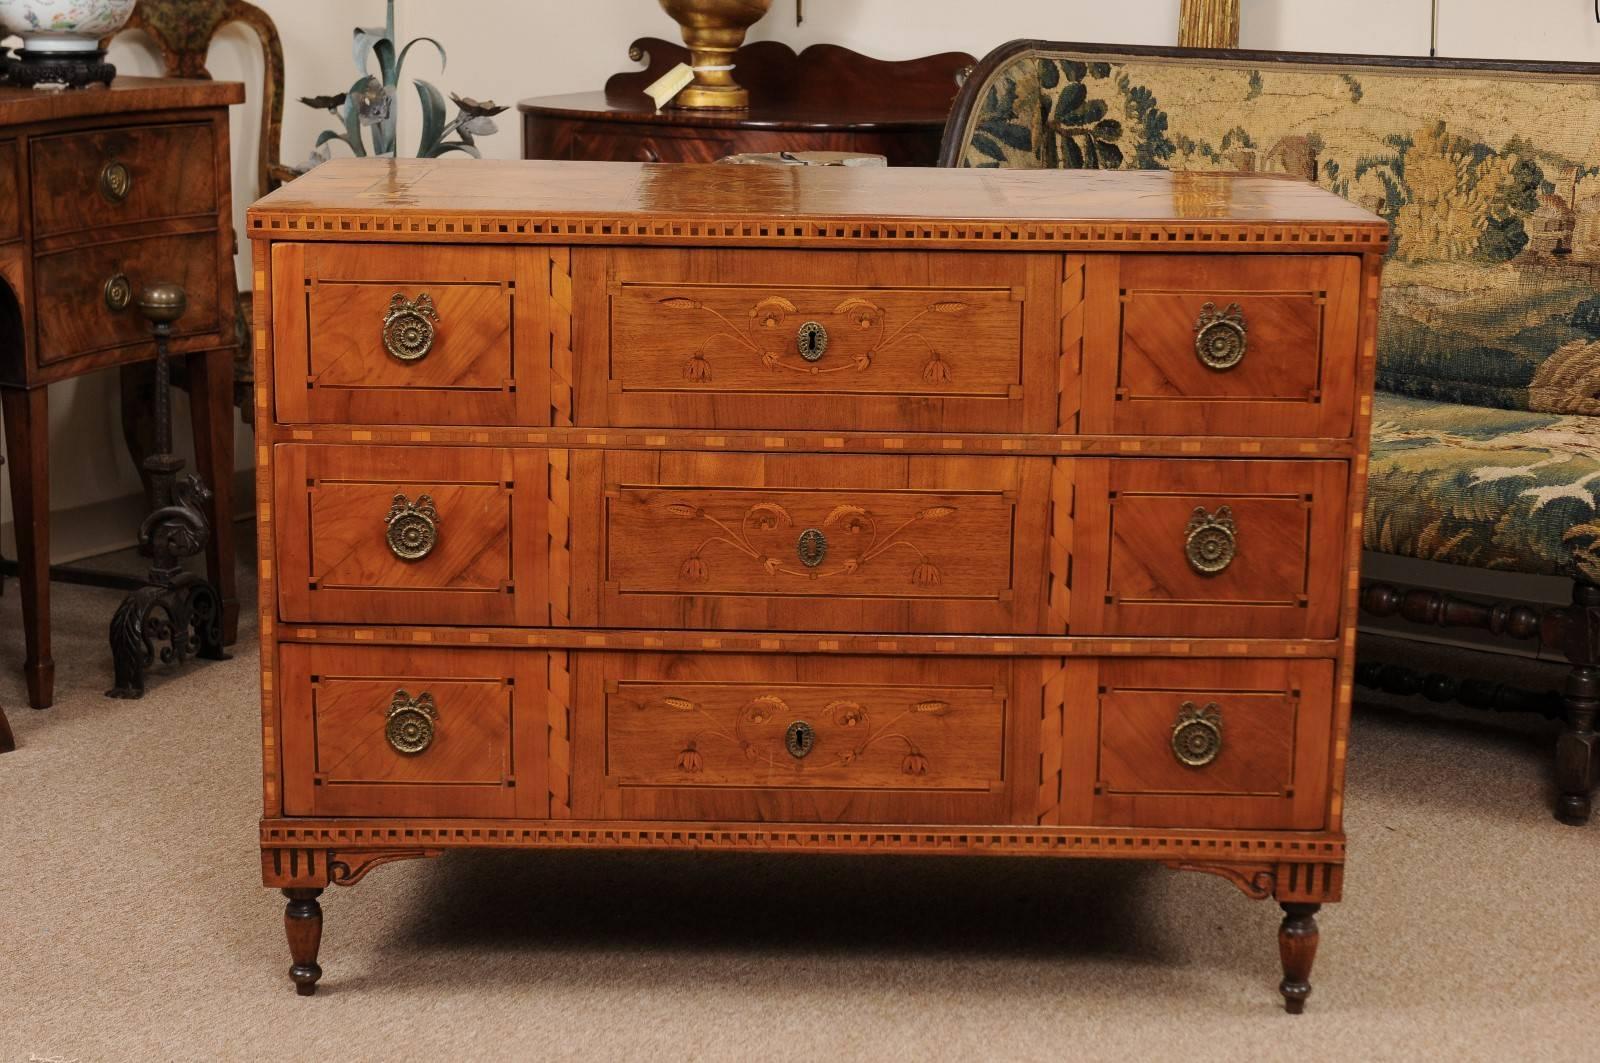 Late 18th century South German neoclassical walnut and fruitwood commode with parquetry inlay and marquetry inlay of foliage. All resting on turned legs.

 